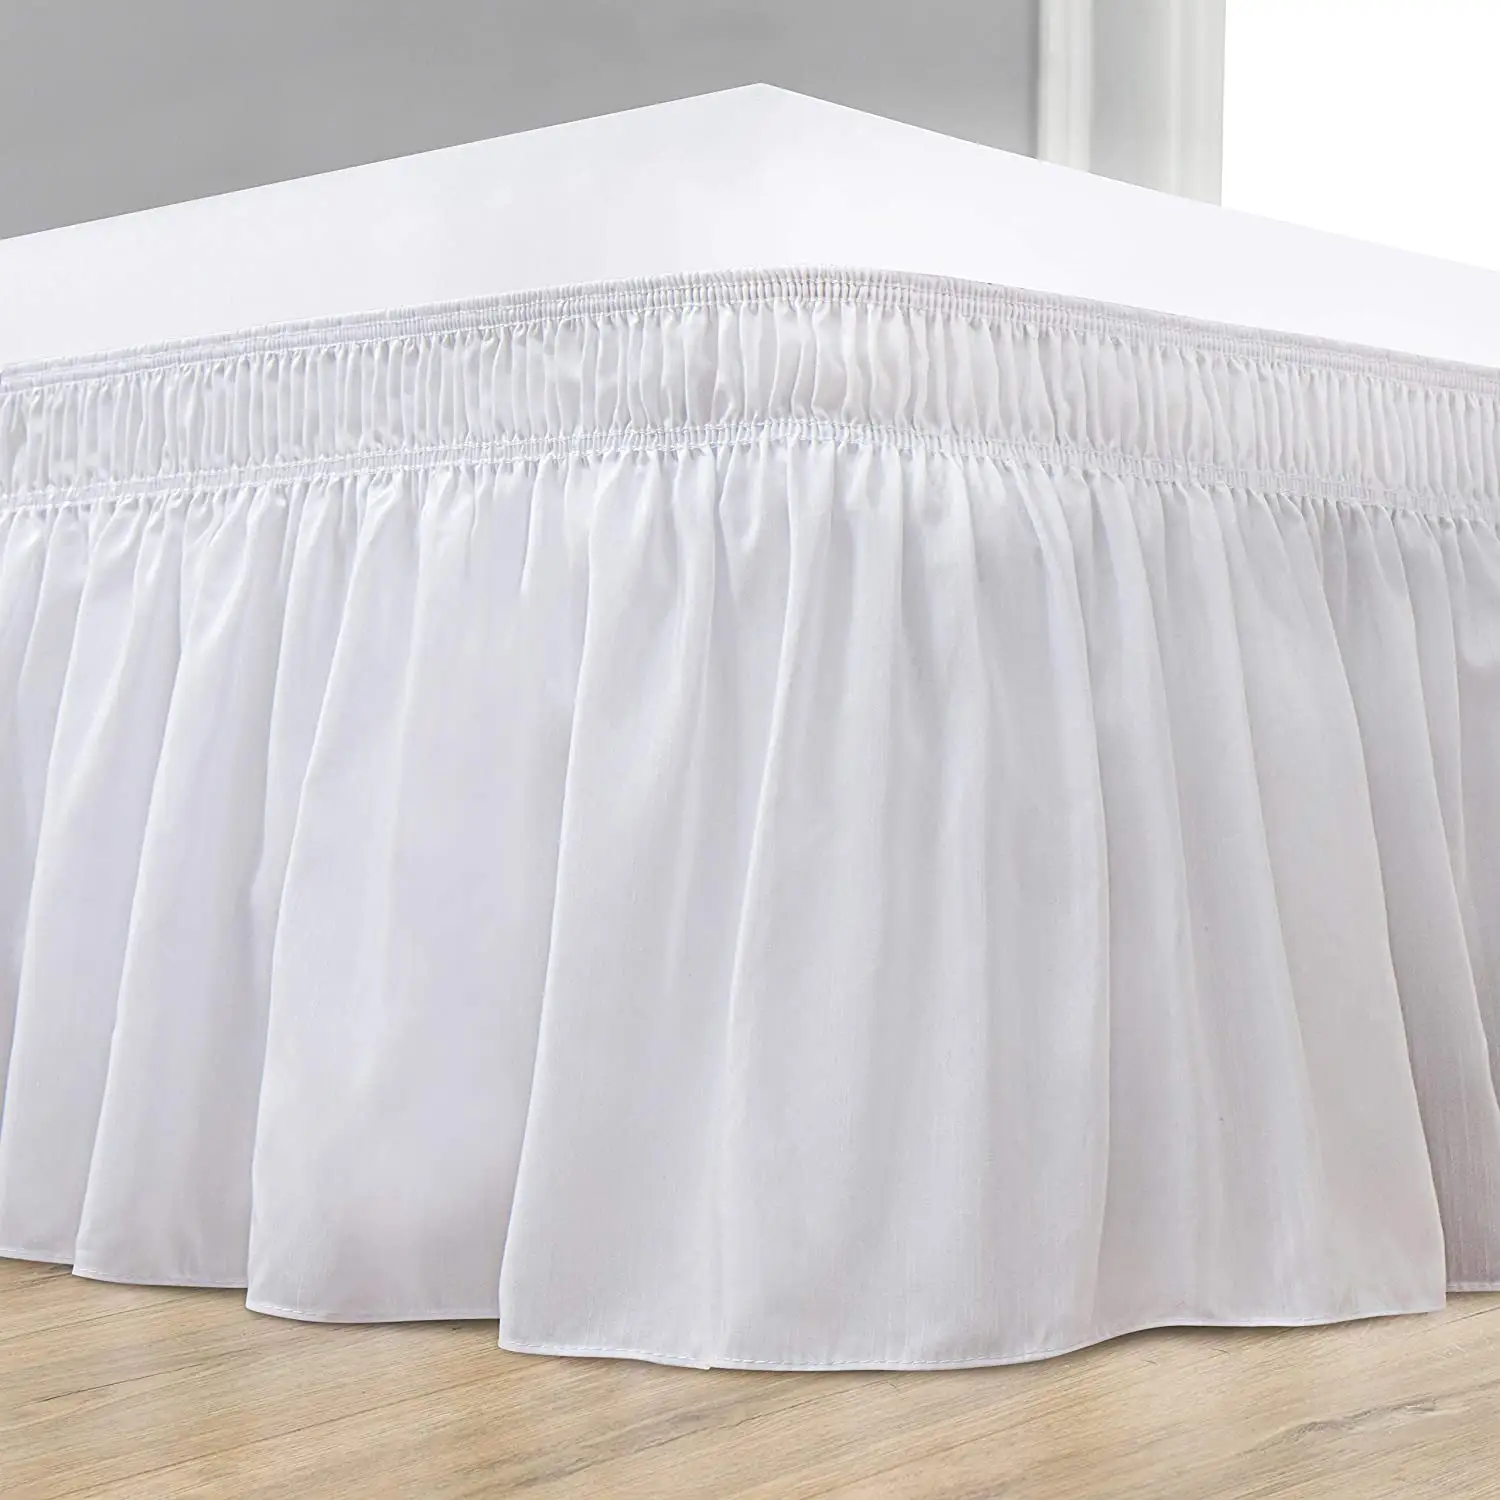 Adjustable Belts Polyester Plain Colour Hotel Home Wrap Around Bedskirts White Bed Skirt